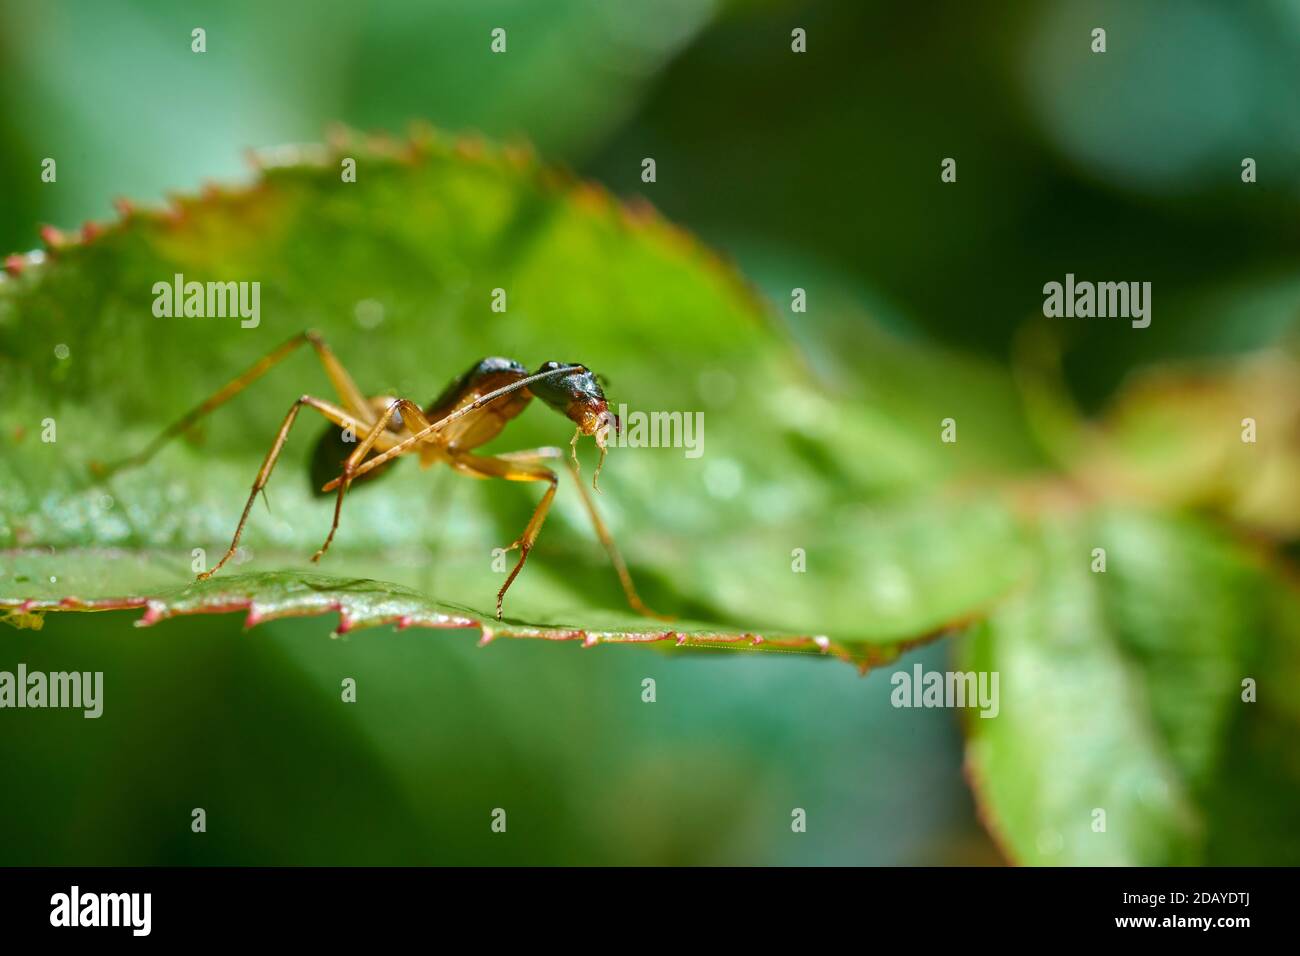 Closeup of a Sugar Ant on a rose leaf. The ant appeared to be collecting dew excreted by aphids on a rose bud above the ants position. Stock Photo